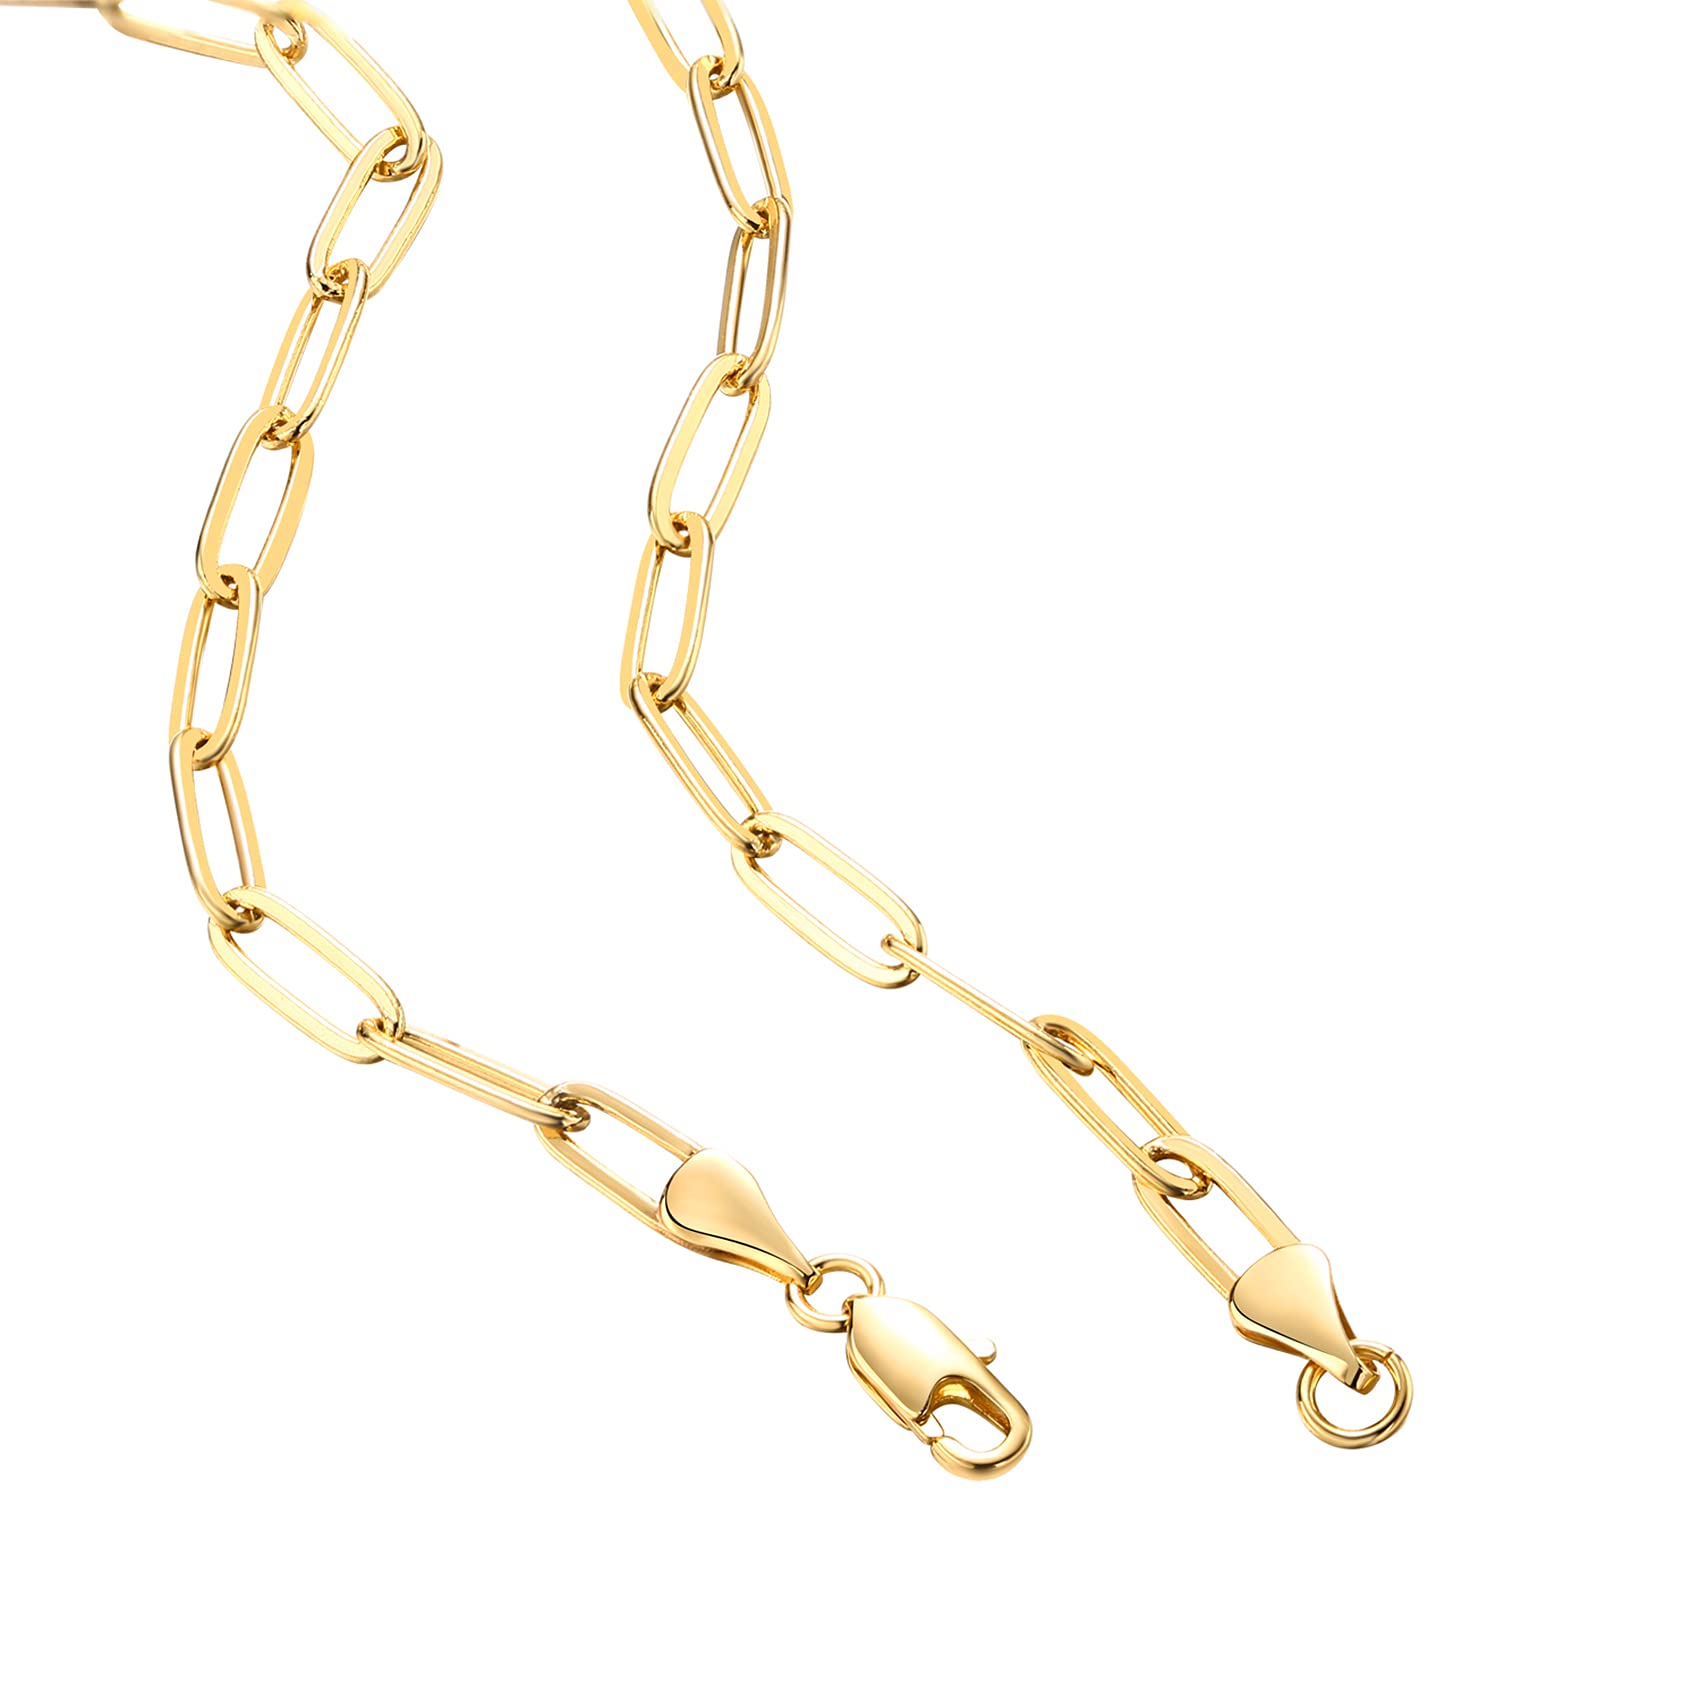 PAVOI 14K Gold Plated Curb Paperclip Box Sphere Bead Snake Herringbone and Figaro Chain Adjustable Necklace